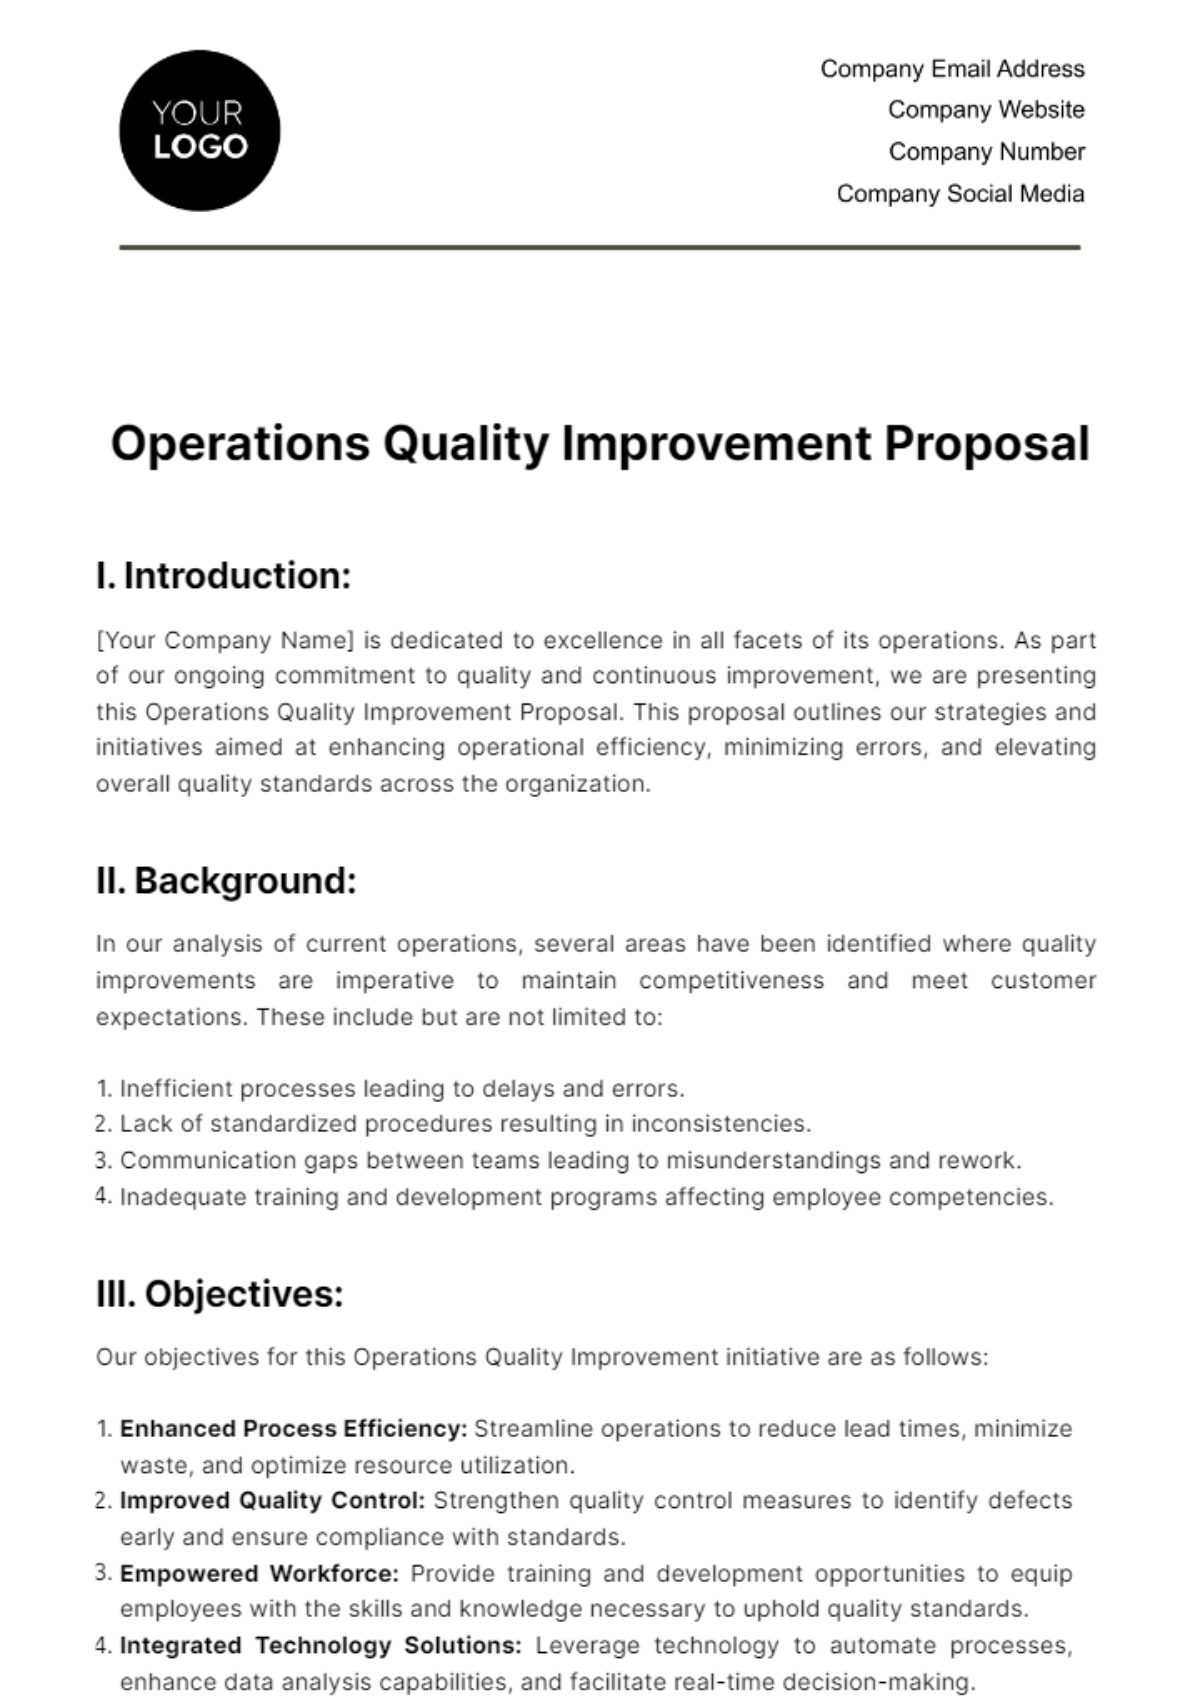 Operations Quality Improvement Proposal Template